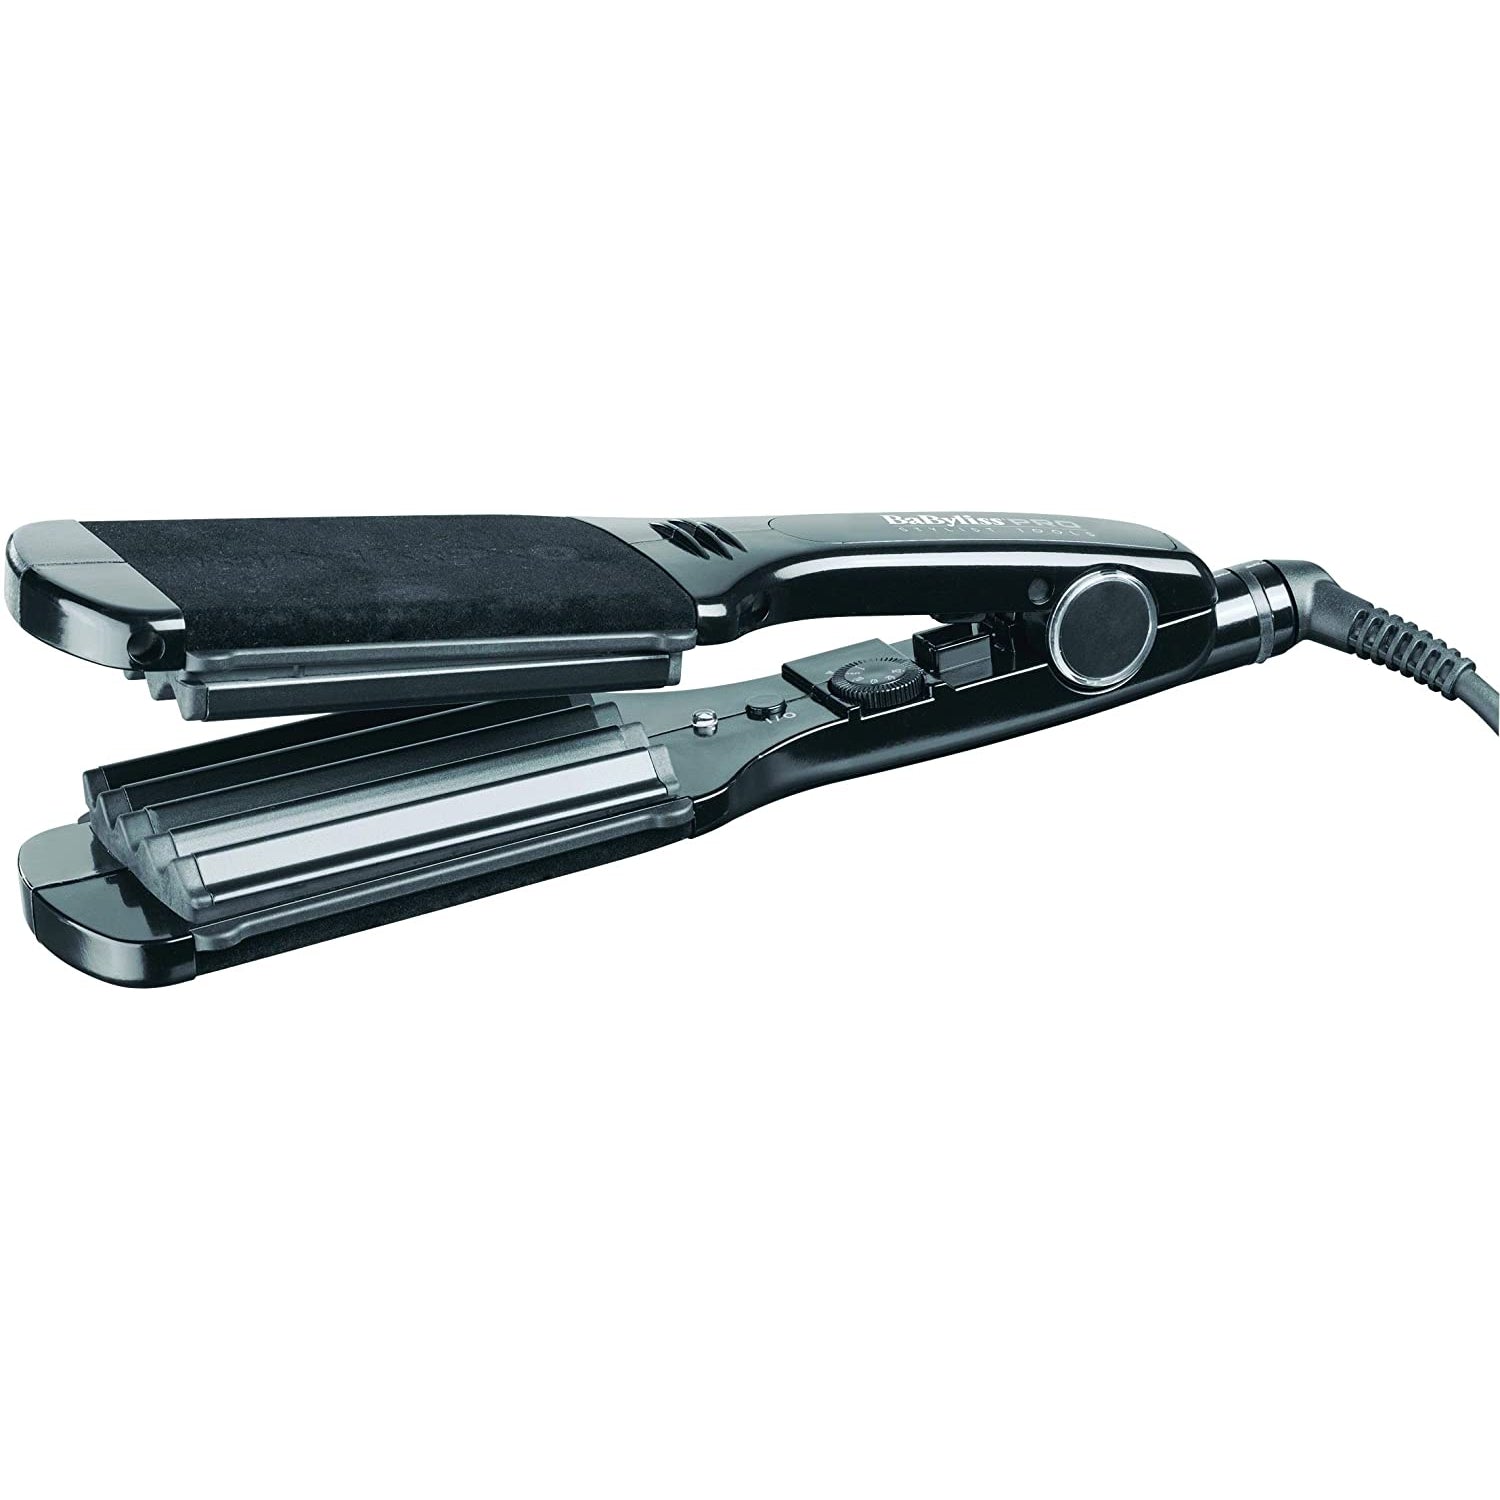 Babyliss Pro Crimpers Ceramic Crimping Iron with Extra Wide Plates - Black